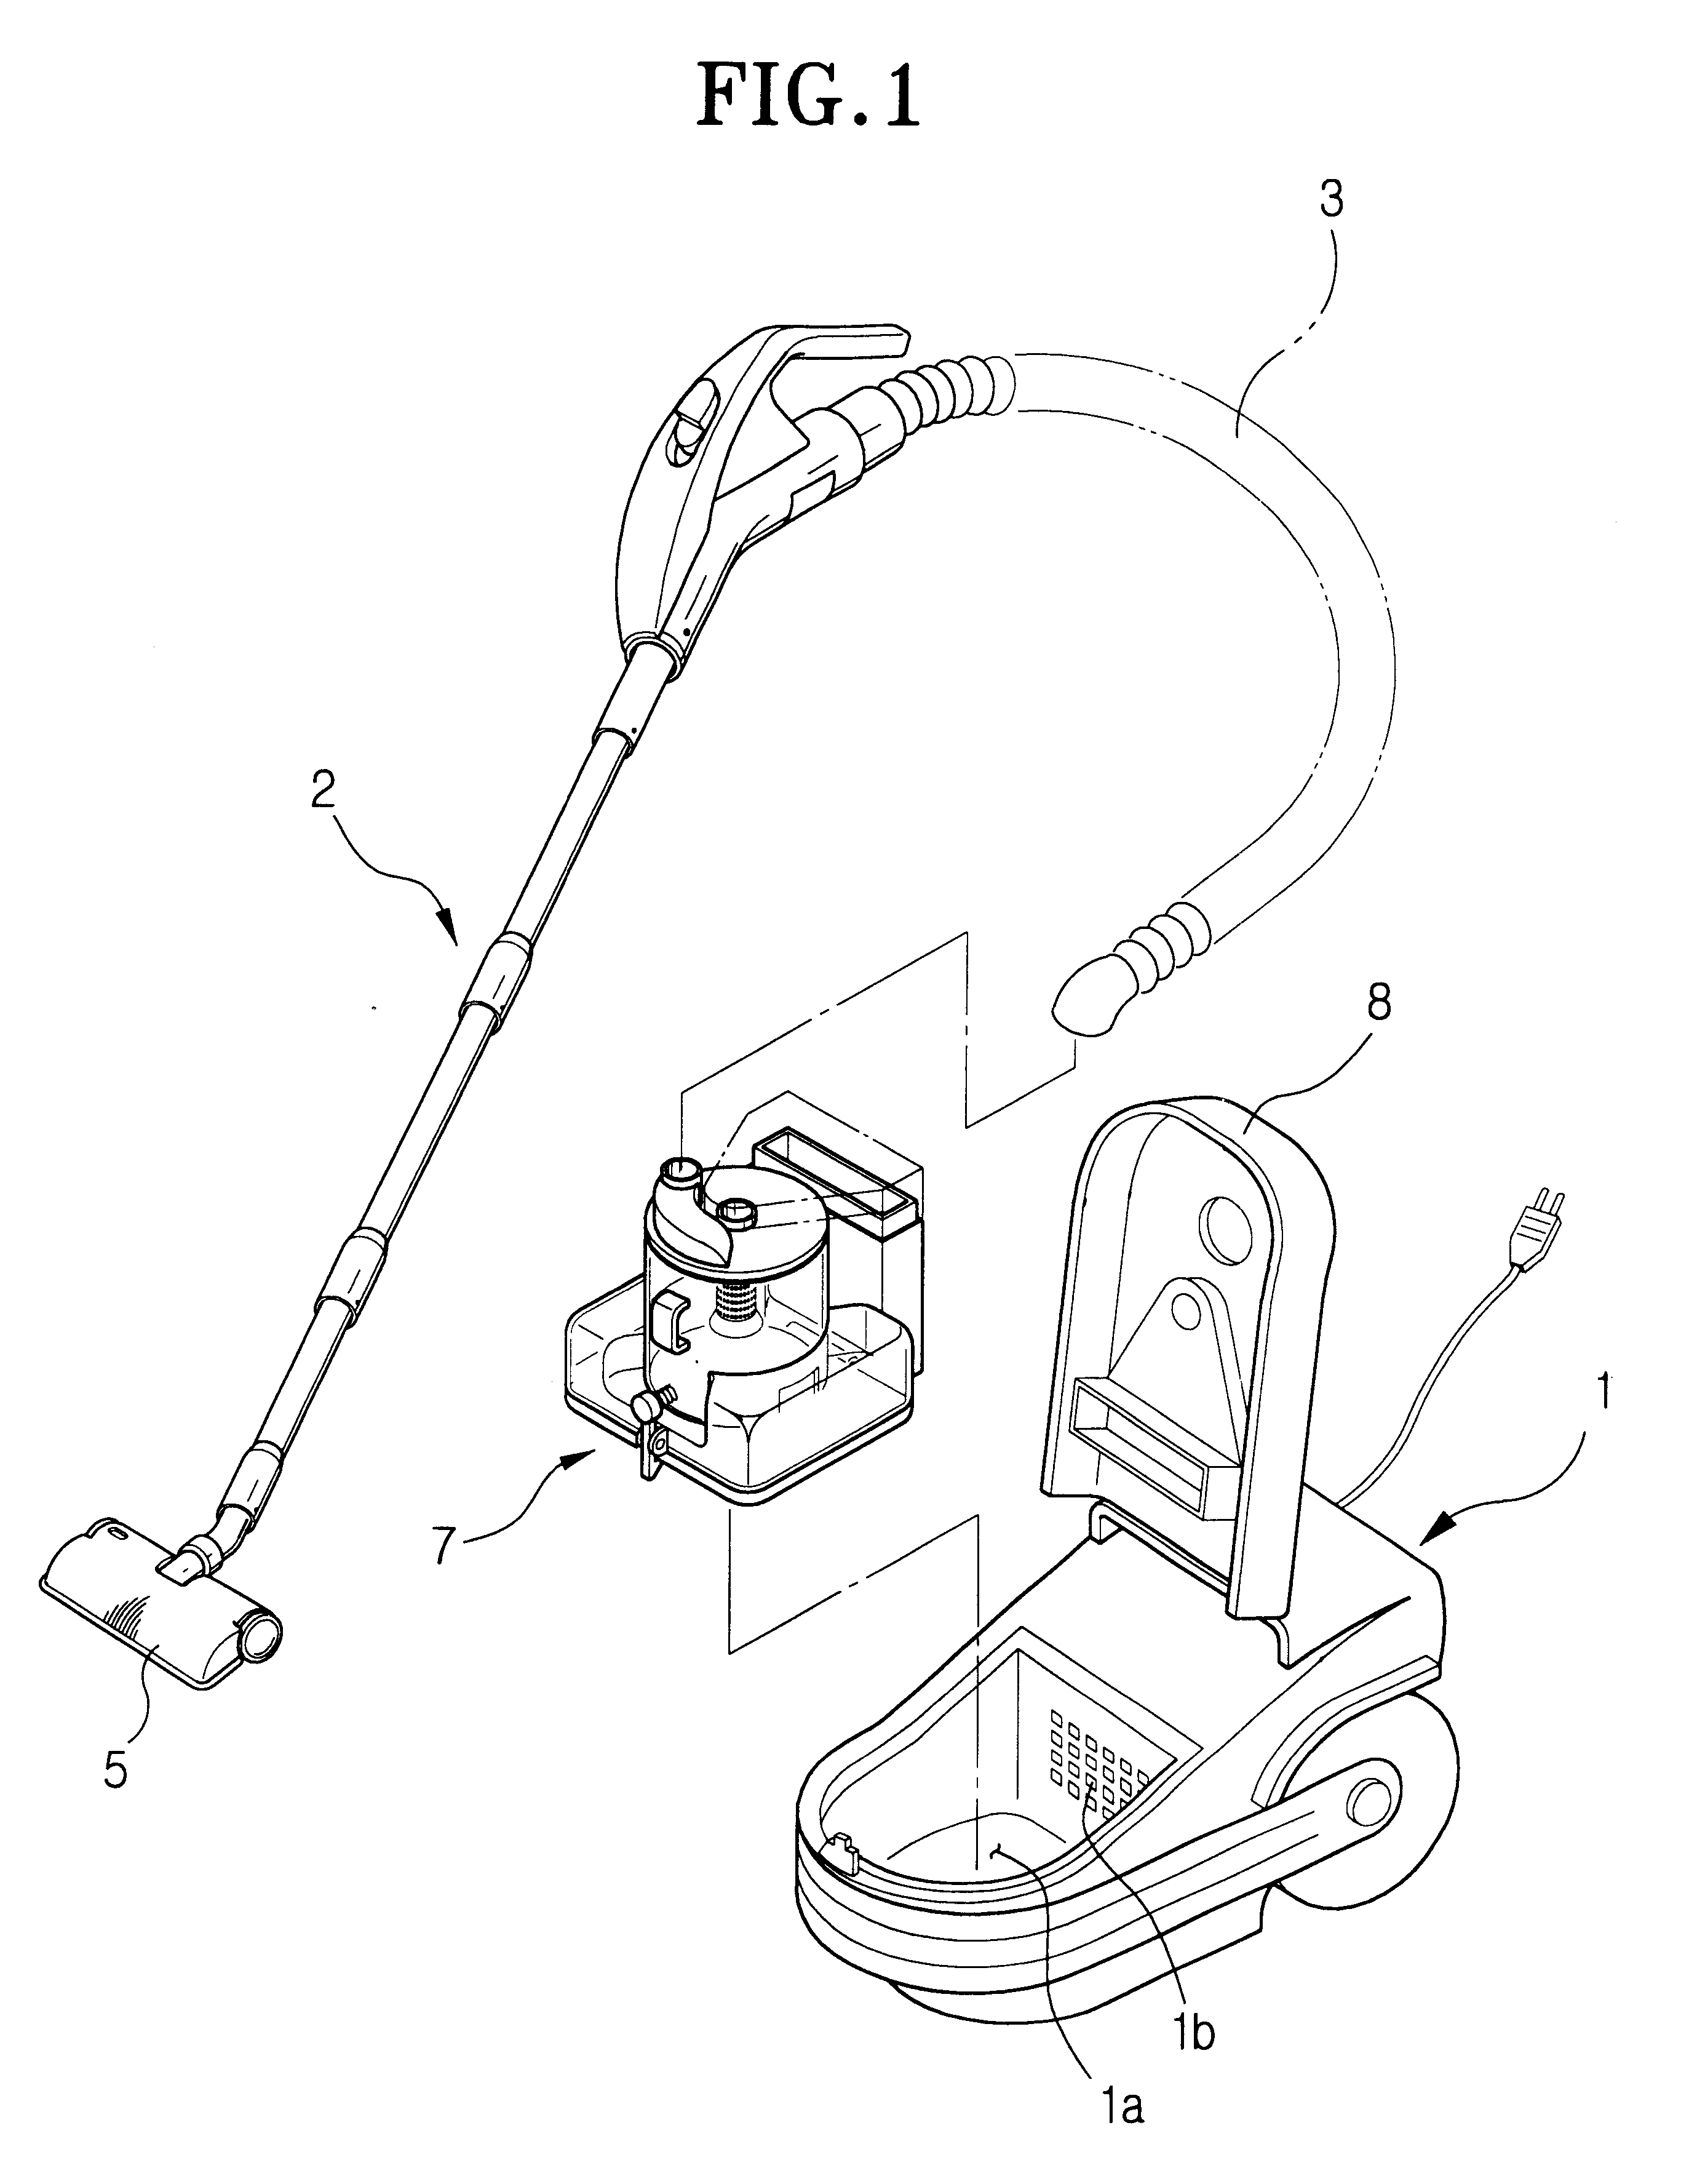 Vacuum cleaner having a cyclone type dust collecting apparatus